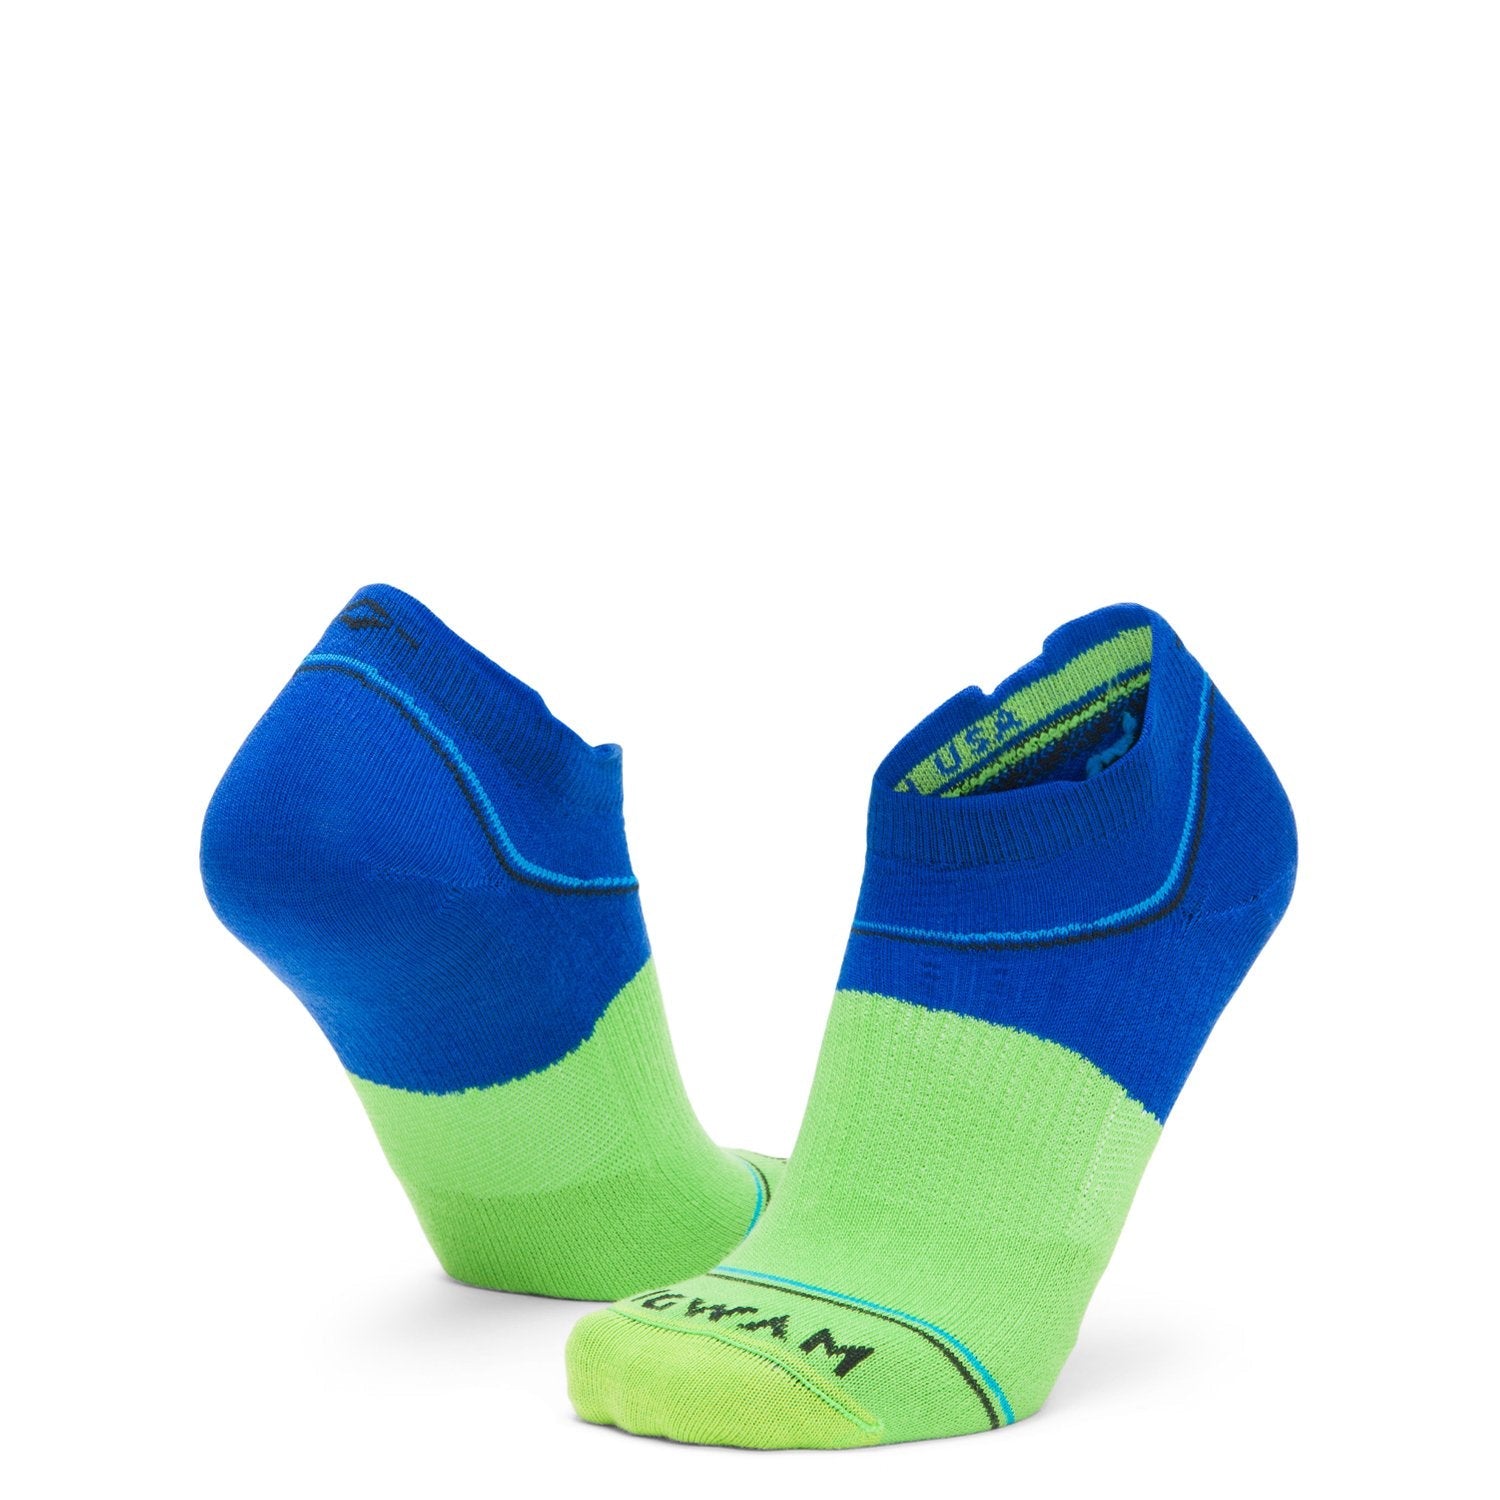 Surpass Ultra Lightweight Low Sock - Blue/Green full product perspective - made in The USA Wigwam Socks